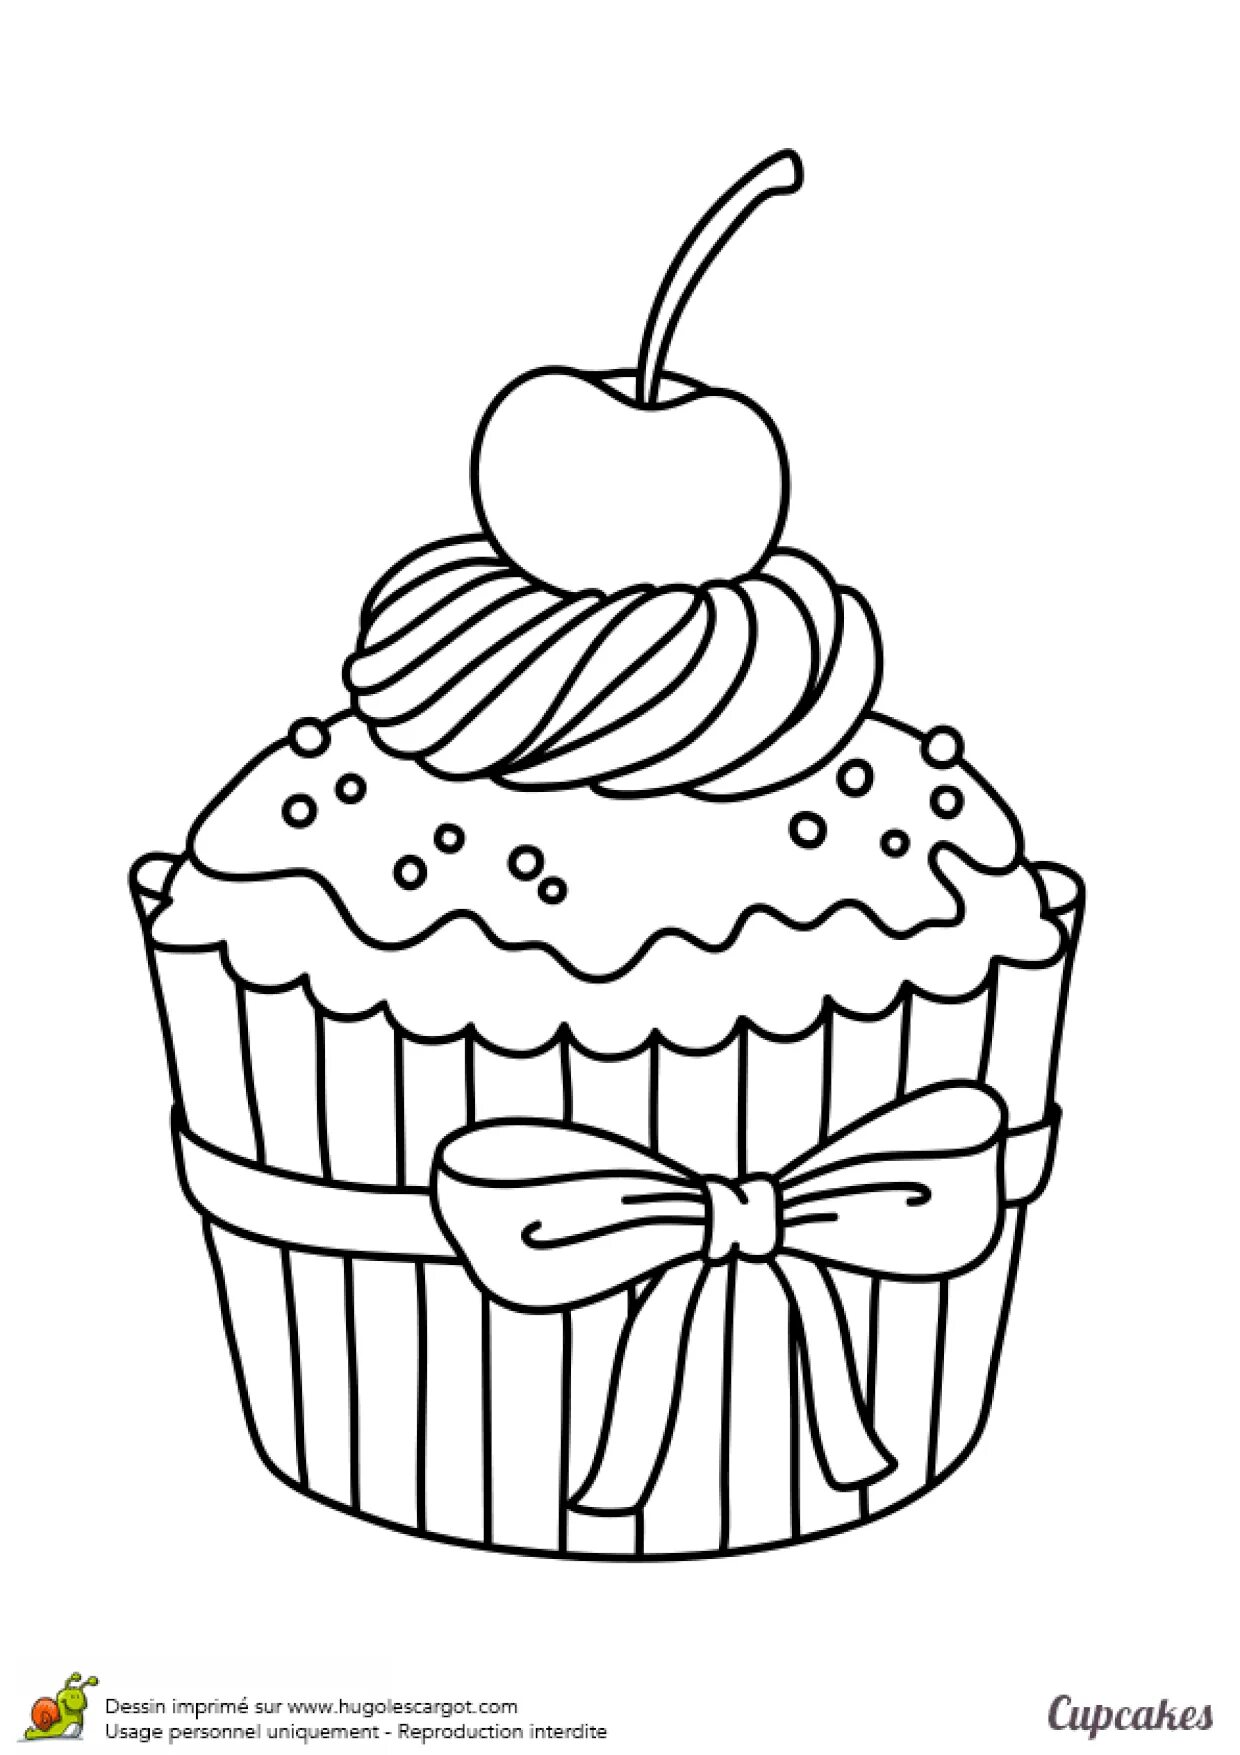 Glitter cake coloring page